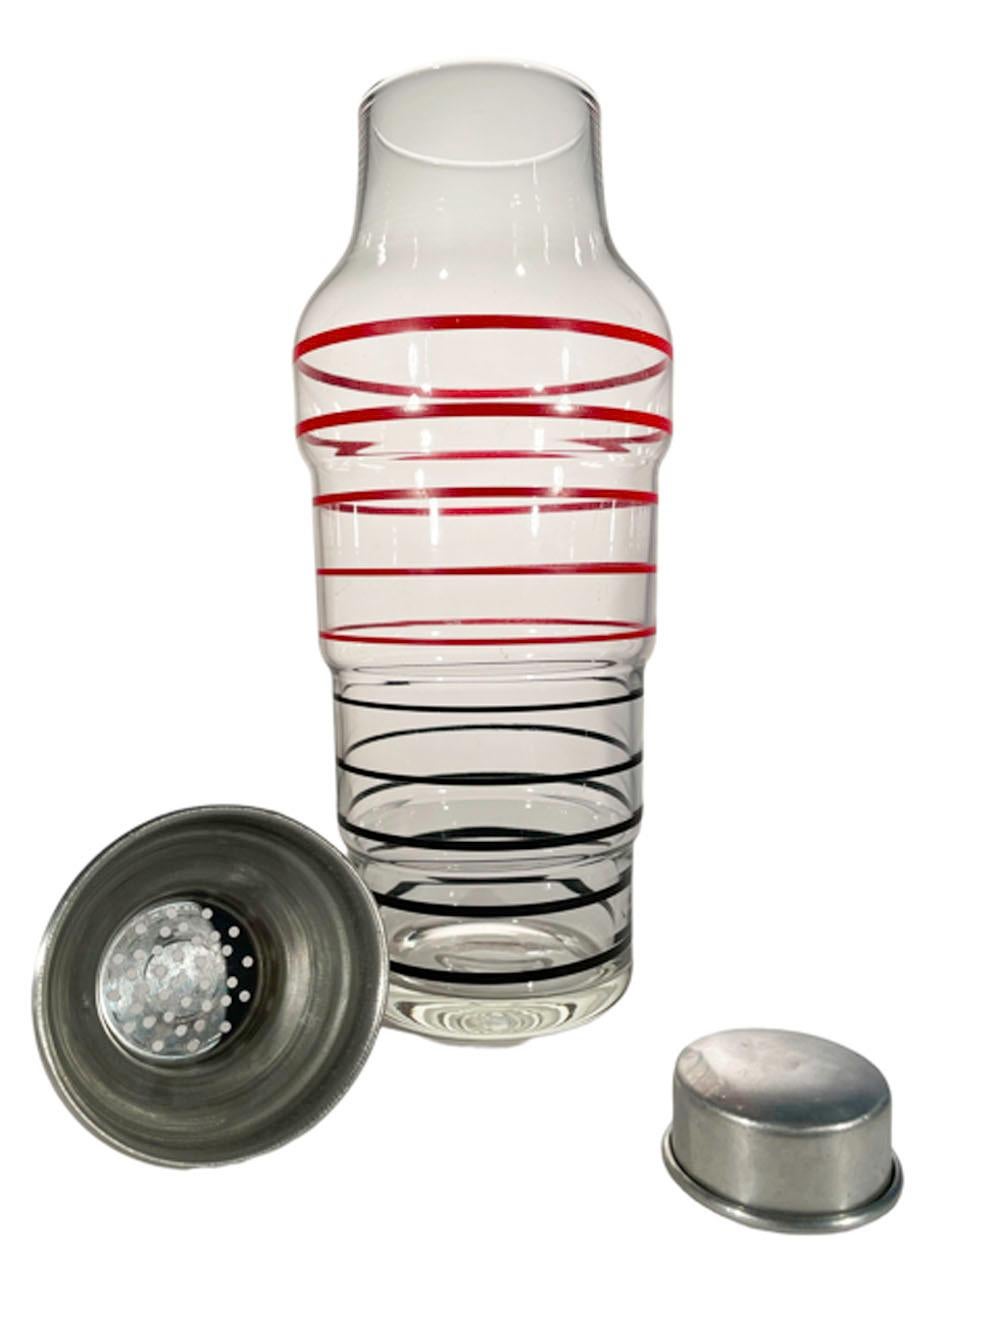 Large Art Deco cobbler type cocktail shaker of clear glass of stepped tapering form with aluminum lid and cap. The clear glass painted with red lines above black lines and with the line widths narrowing toward the center. This shaker is in the style